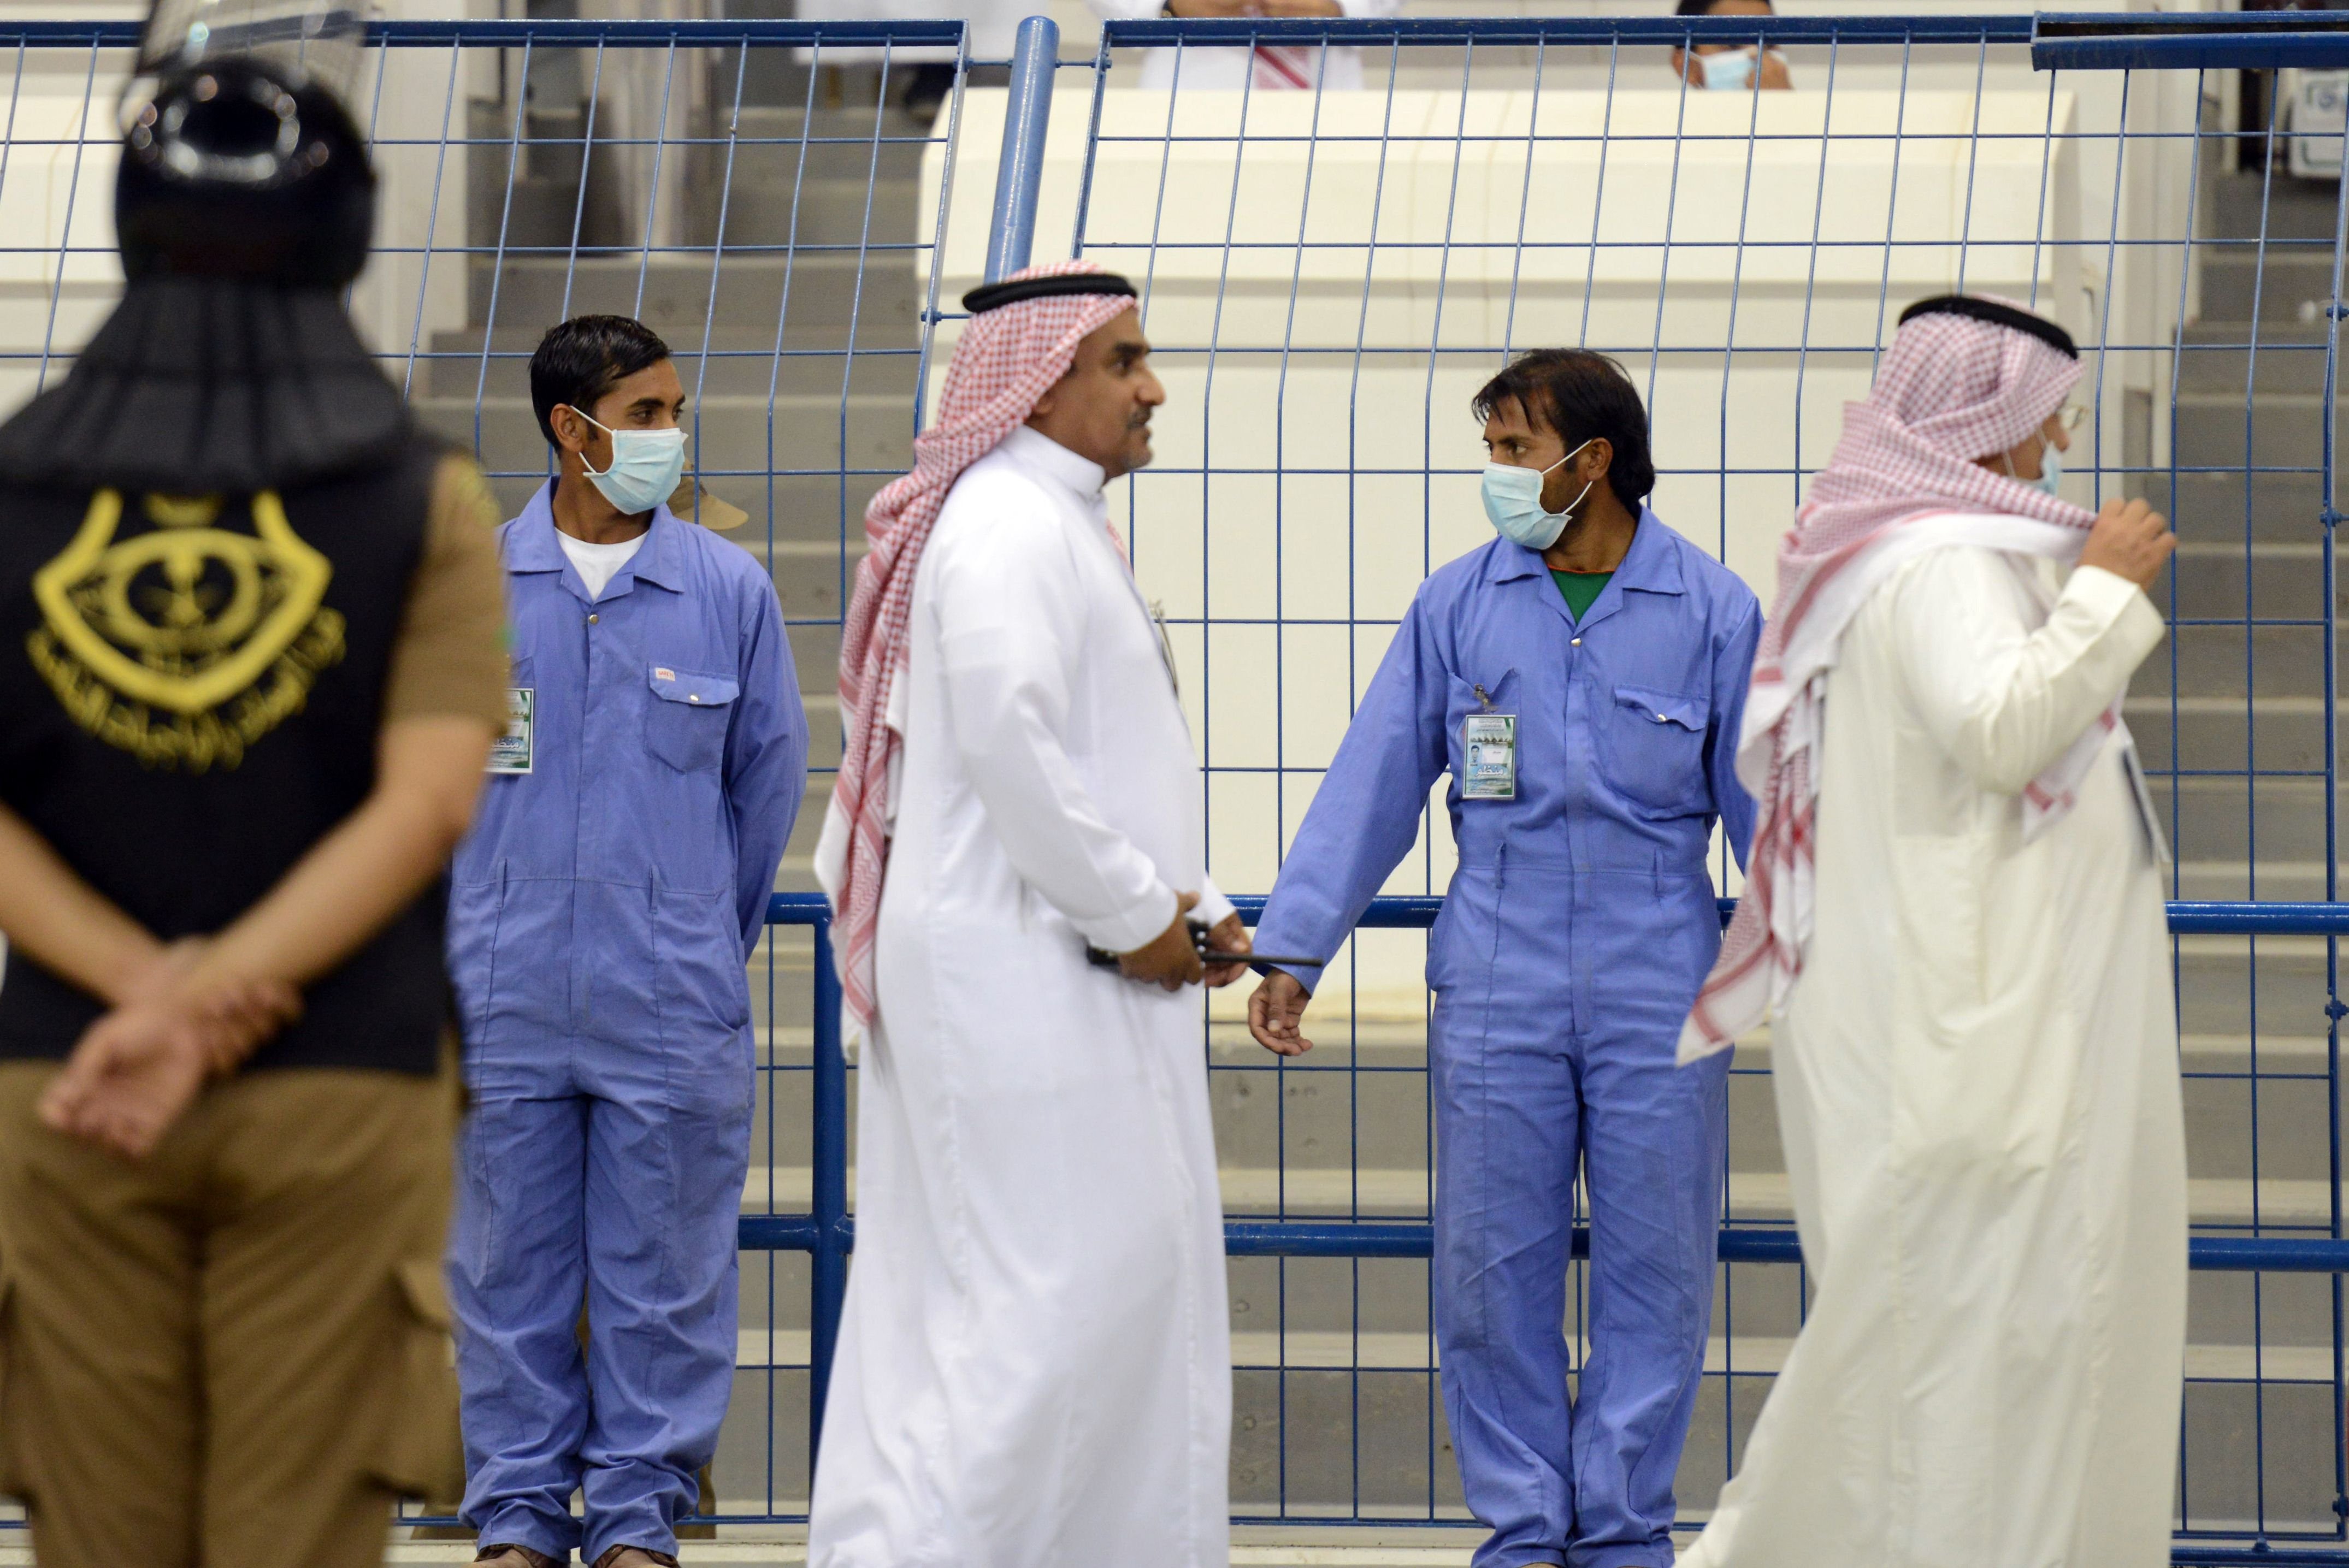 Asian workers wear mouth and nose masks while on duty during a football match at the King Fahad stadium, on April 22, 2014 in Riyadh. The health ministry reported more MERS cases in the city of Jeddah, prompting authorities to close the emergency department at the city's King Fahd Hospital. (Fayez Nureldine—AFP/Getty Images)